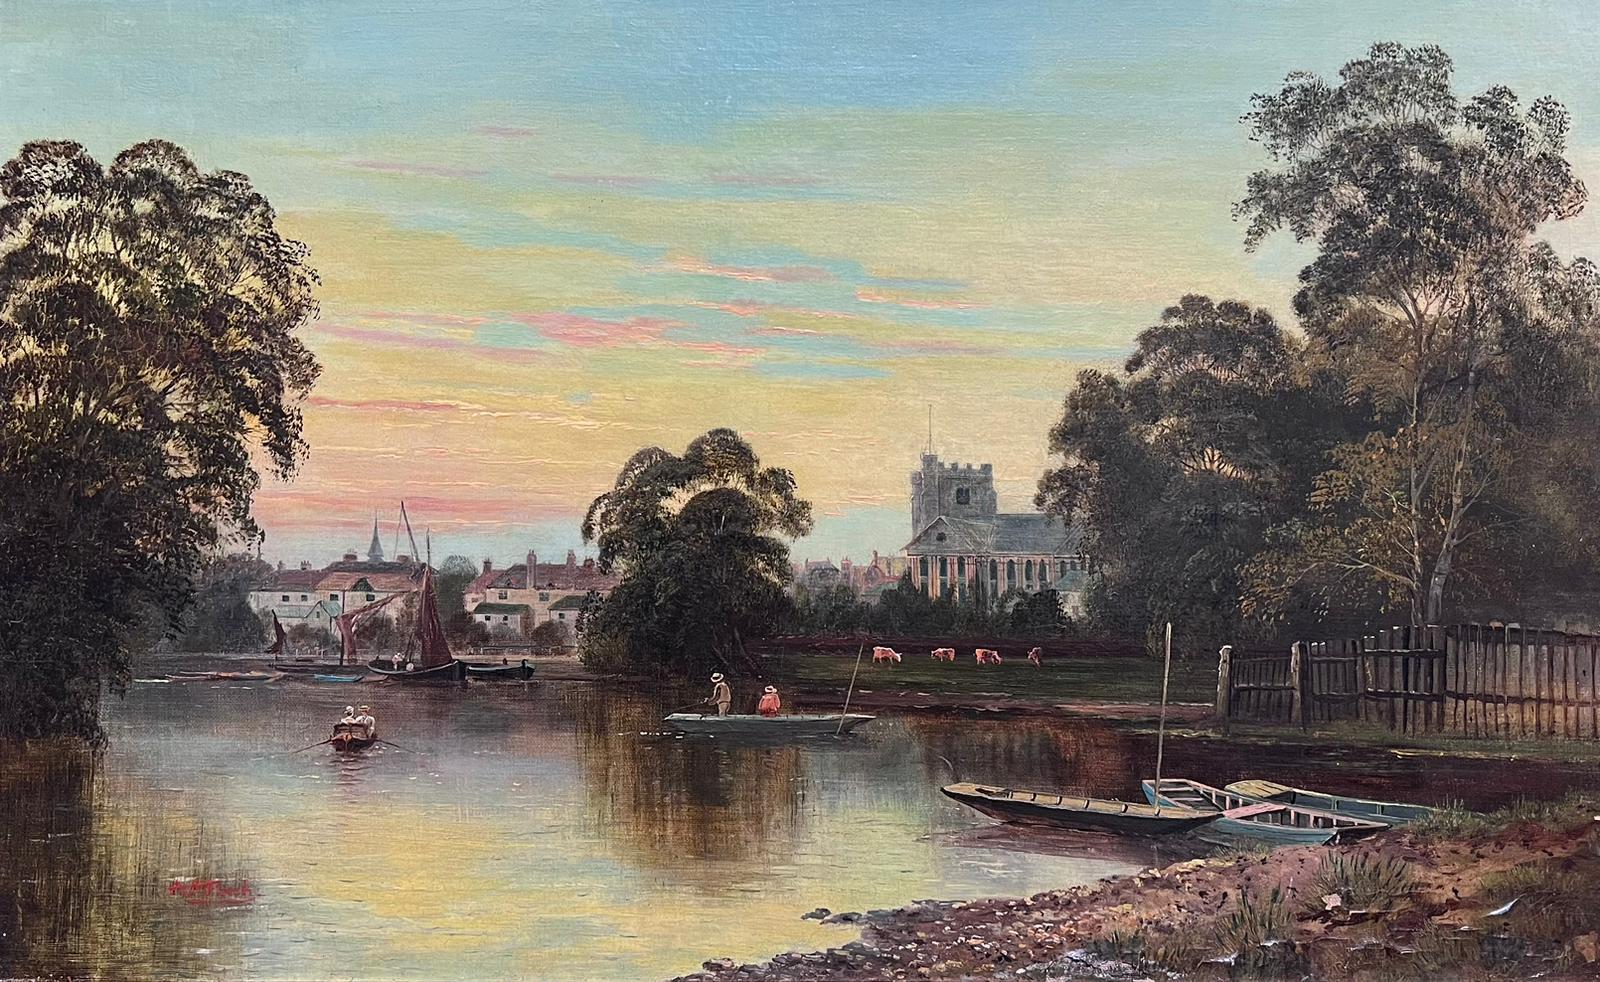 Victorian English Landscape Painting - Windsor/ Eton on the River Thames Sunset Antique Signed English Oil Painting